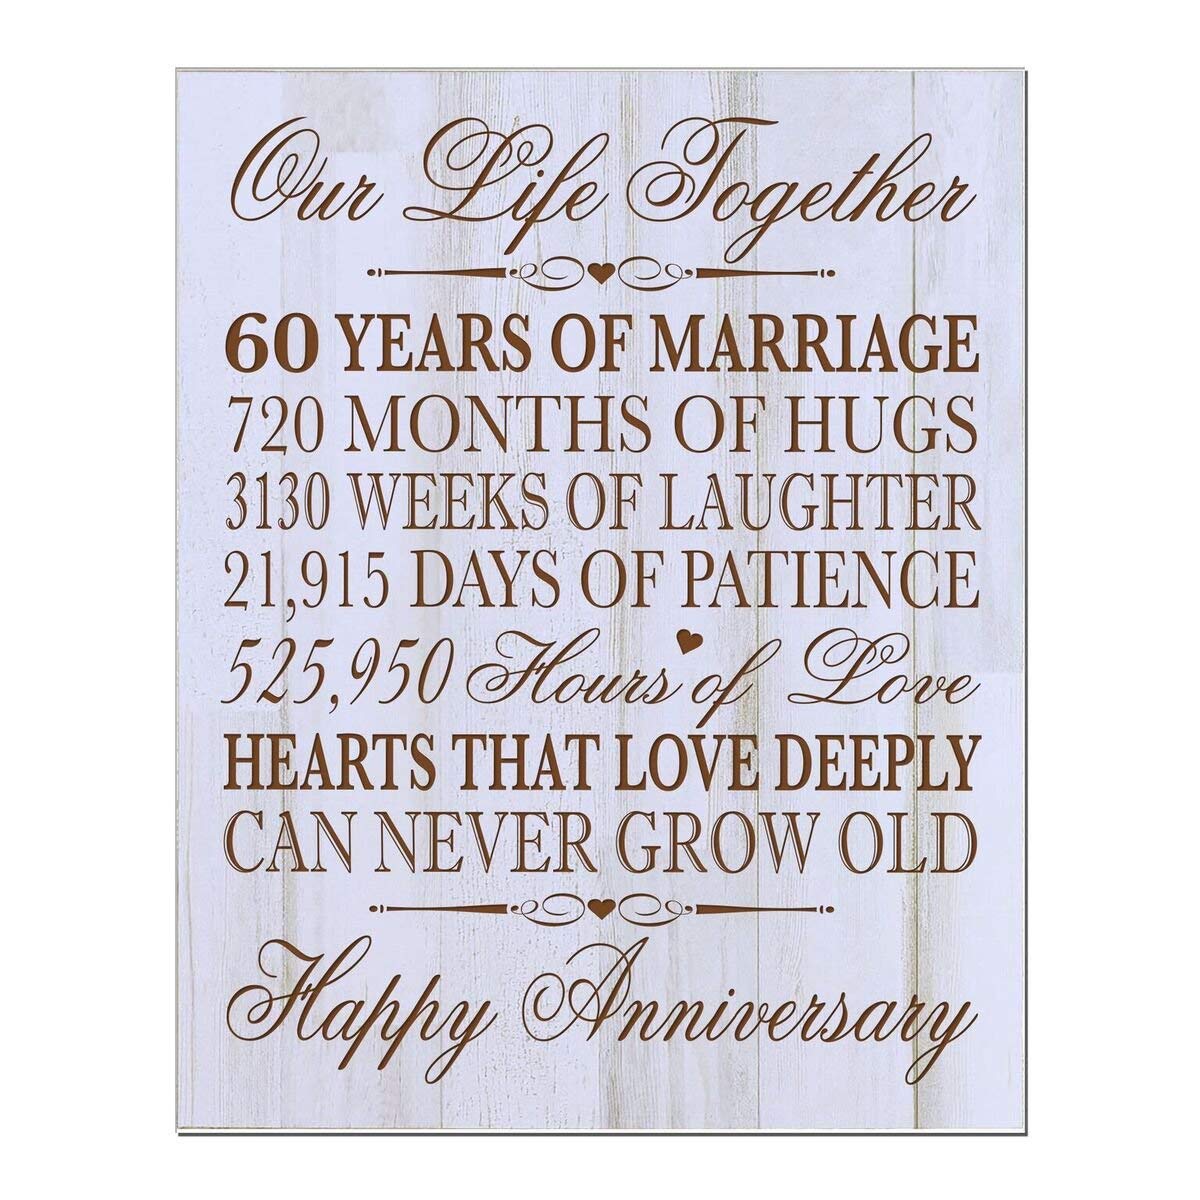 Digitally Printed 60th Anniversary Wall Decor Plaque - Our Life - LifeSong Milestones